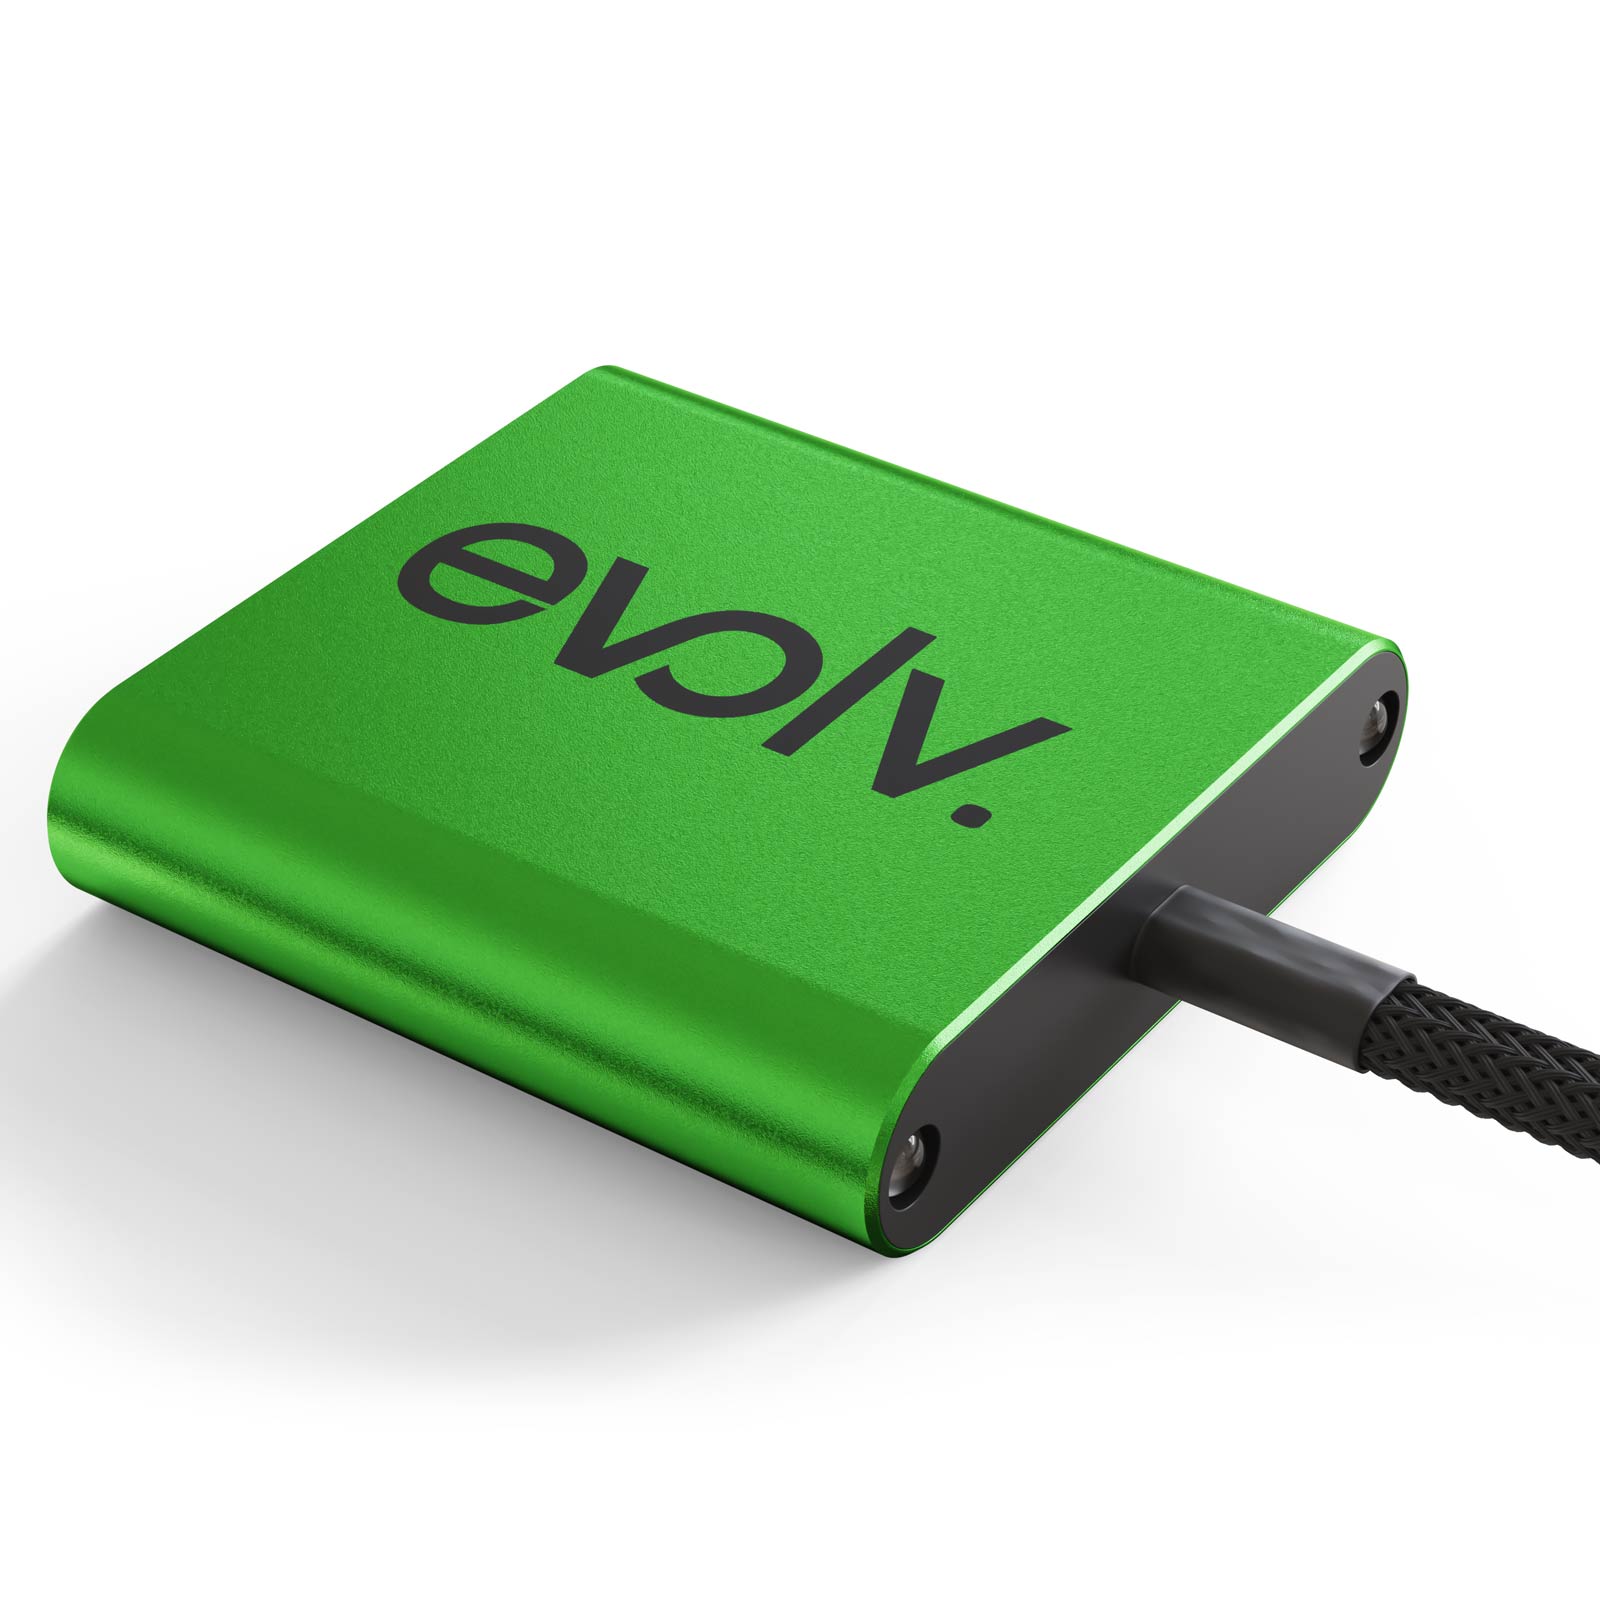 Increase your fuel mileage, performance and throttle response with an Evolv Scion iM Performance Chip!